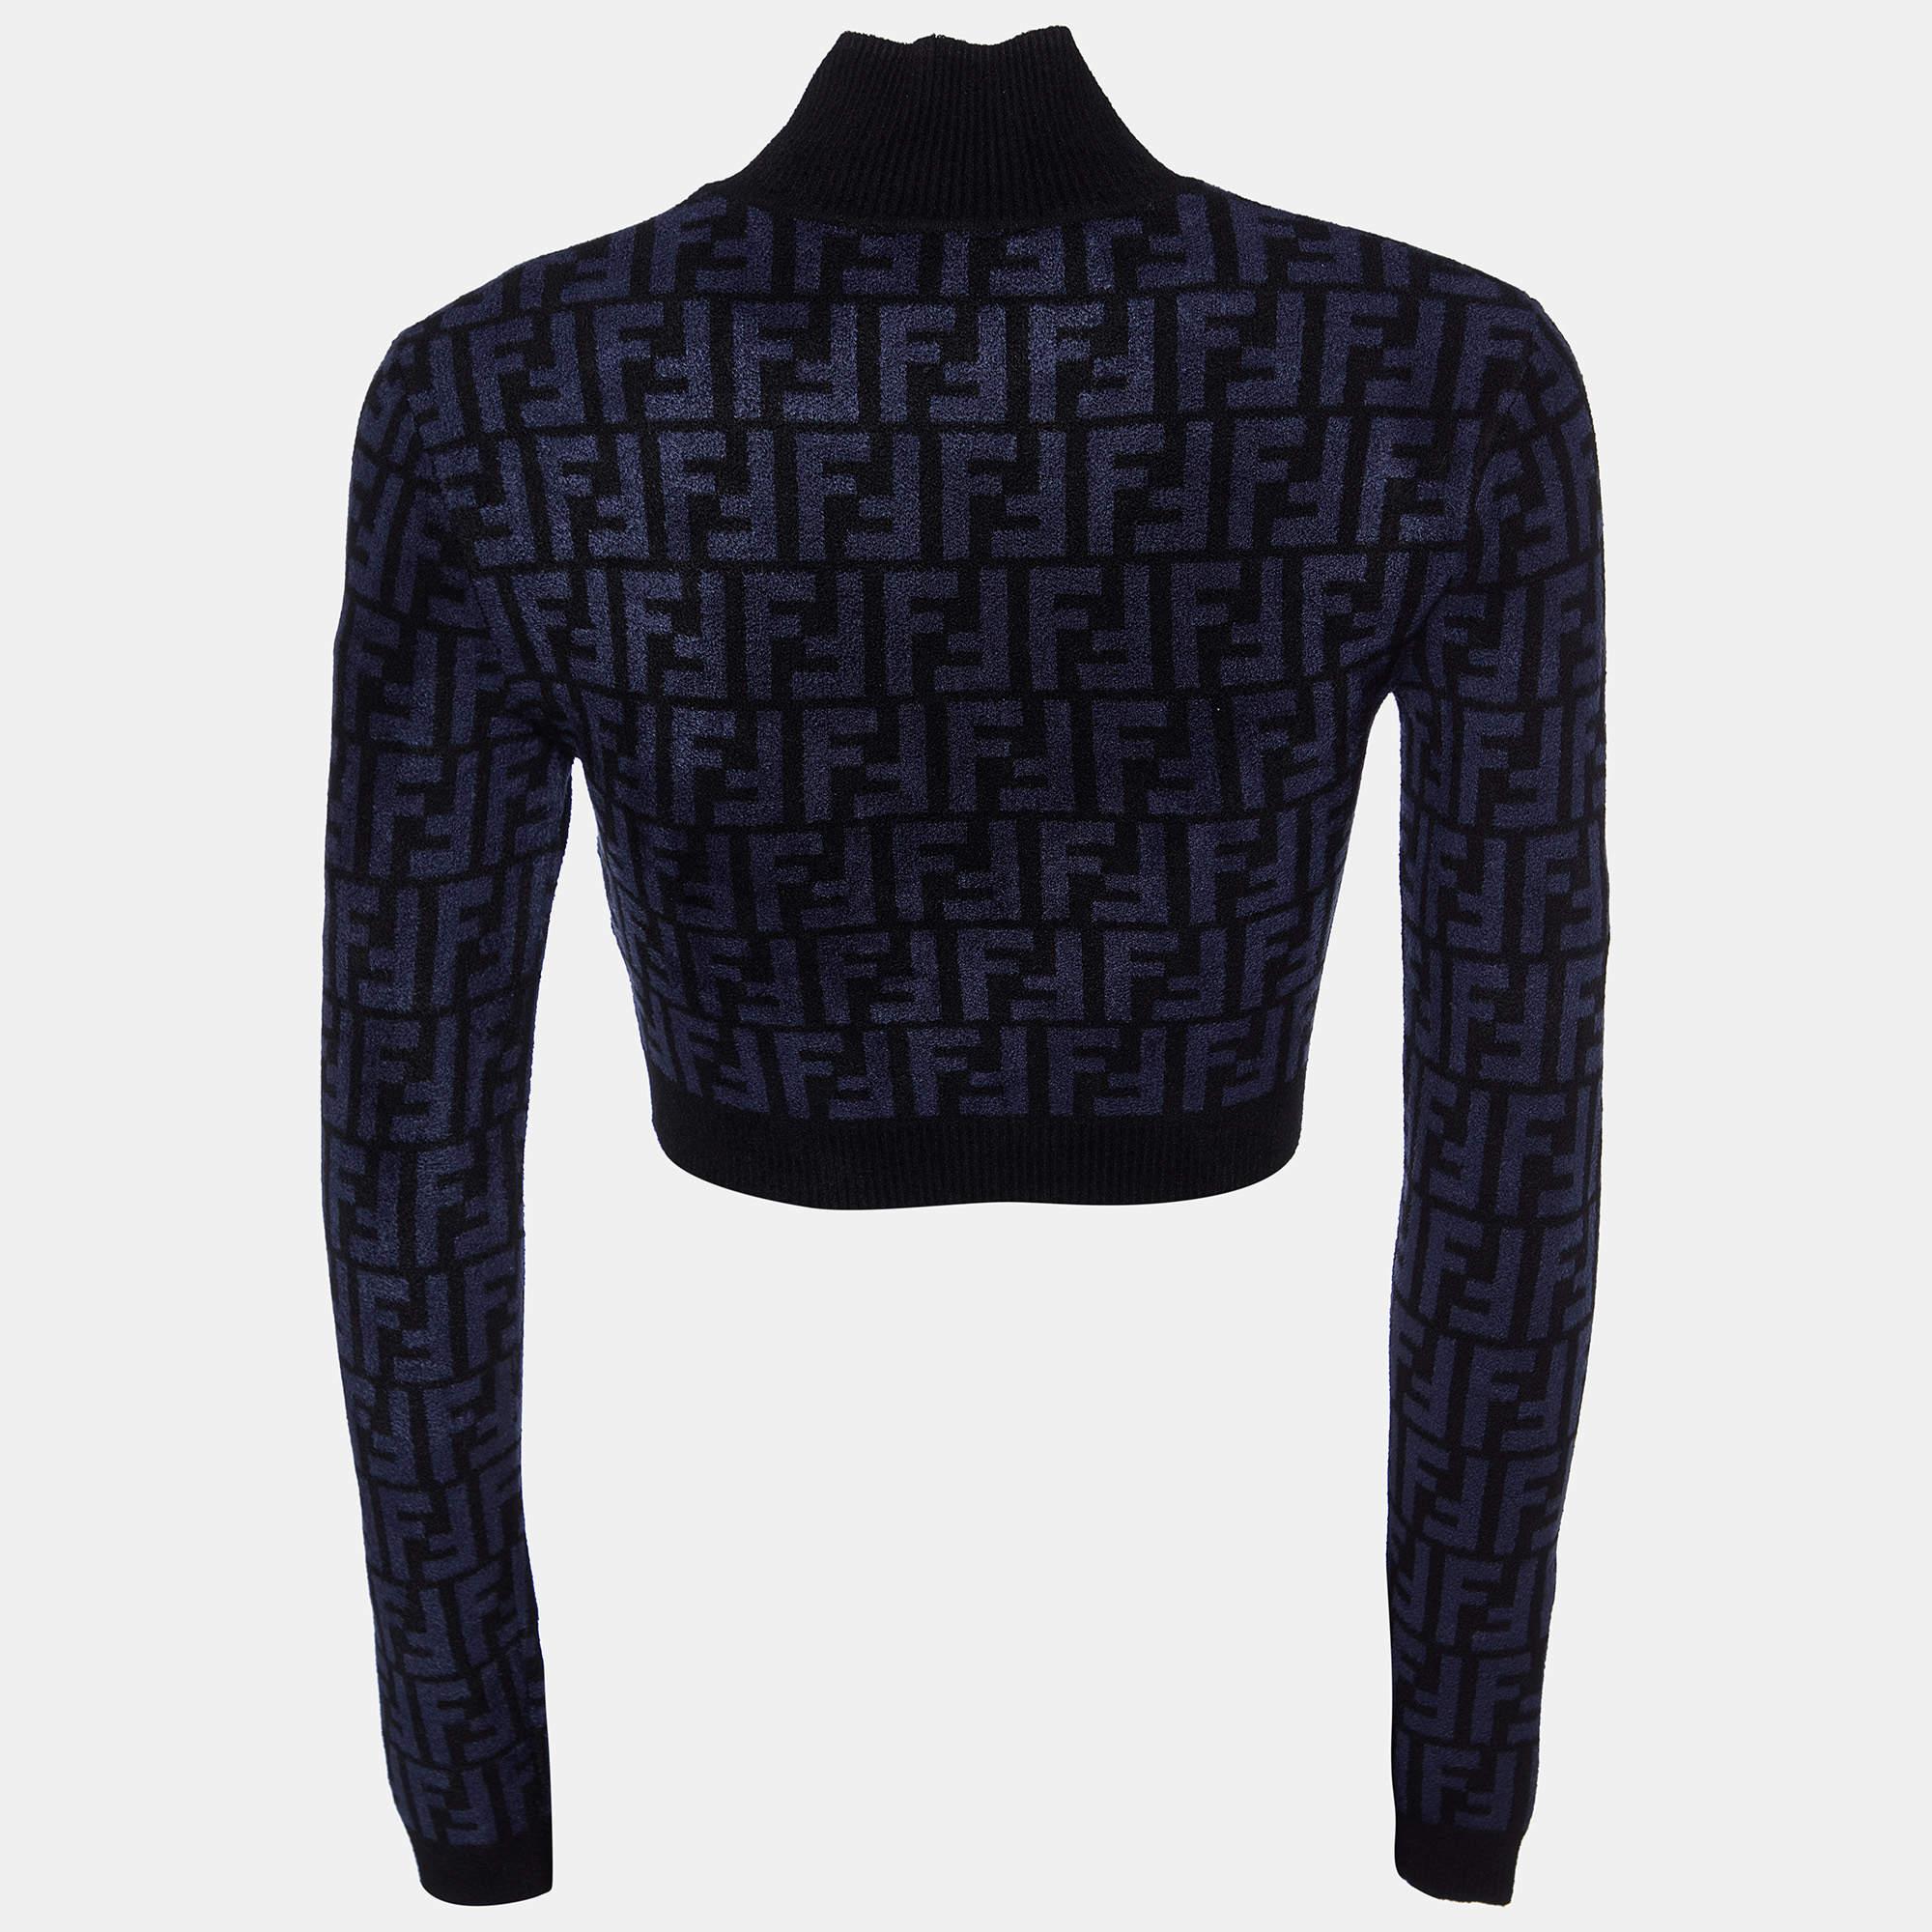 Crafted with finesse, the Fendi crop top embodies understated elegance. Its luxurious knit fabric boasts Fendi's iconic monogram in a sophisticated navy blue and black palette. The cropped silhouette exudes contemporary chic, while the crew neckline